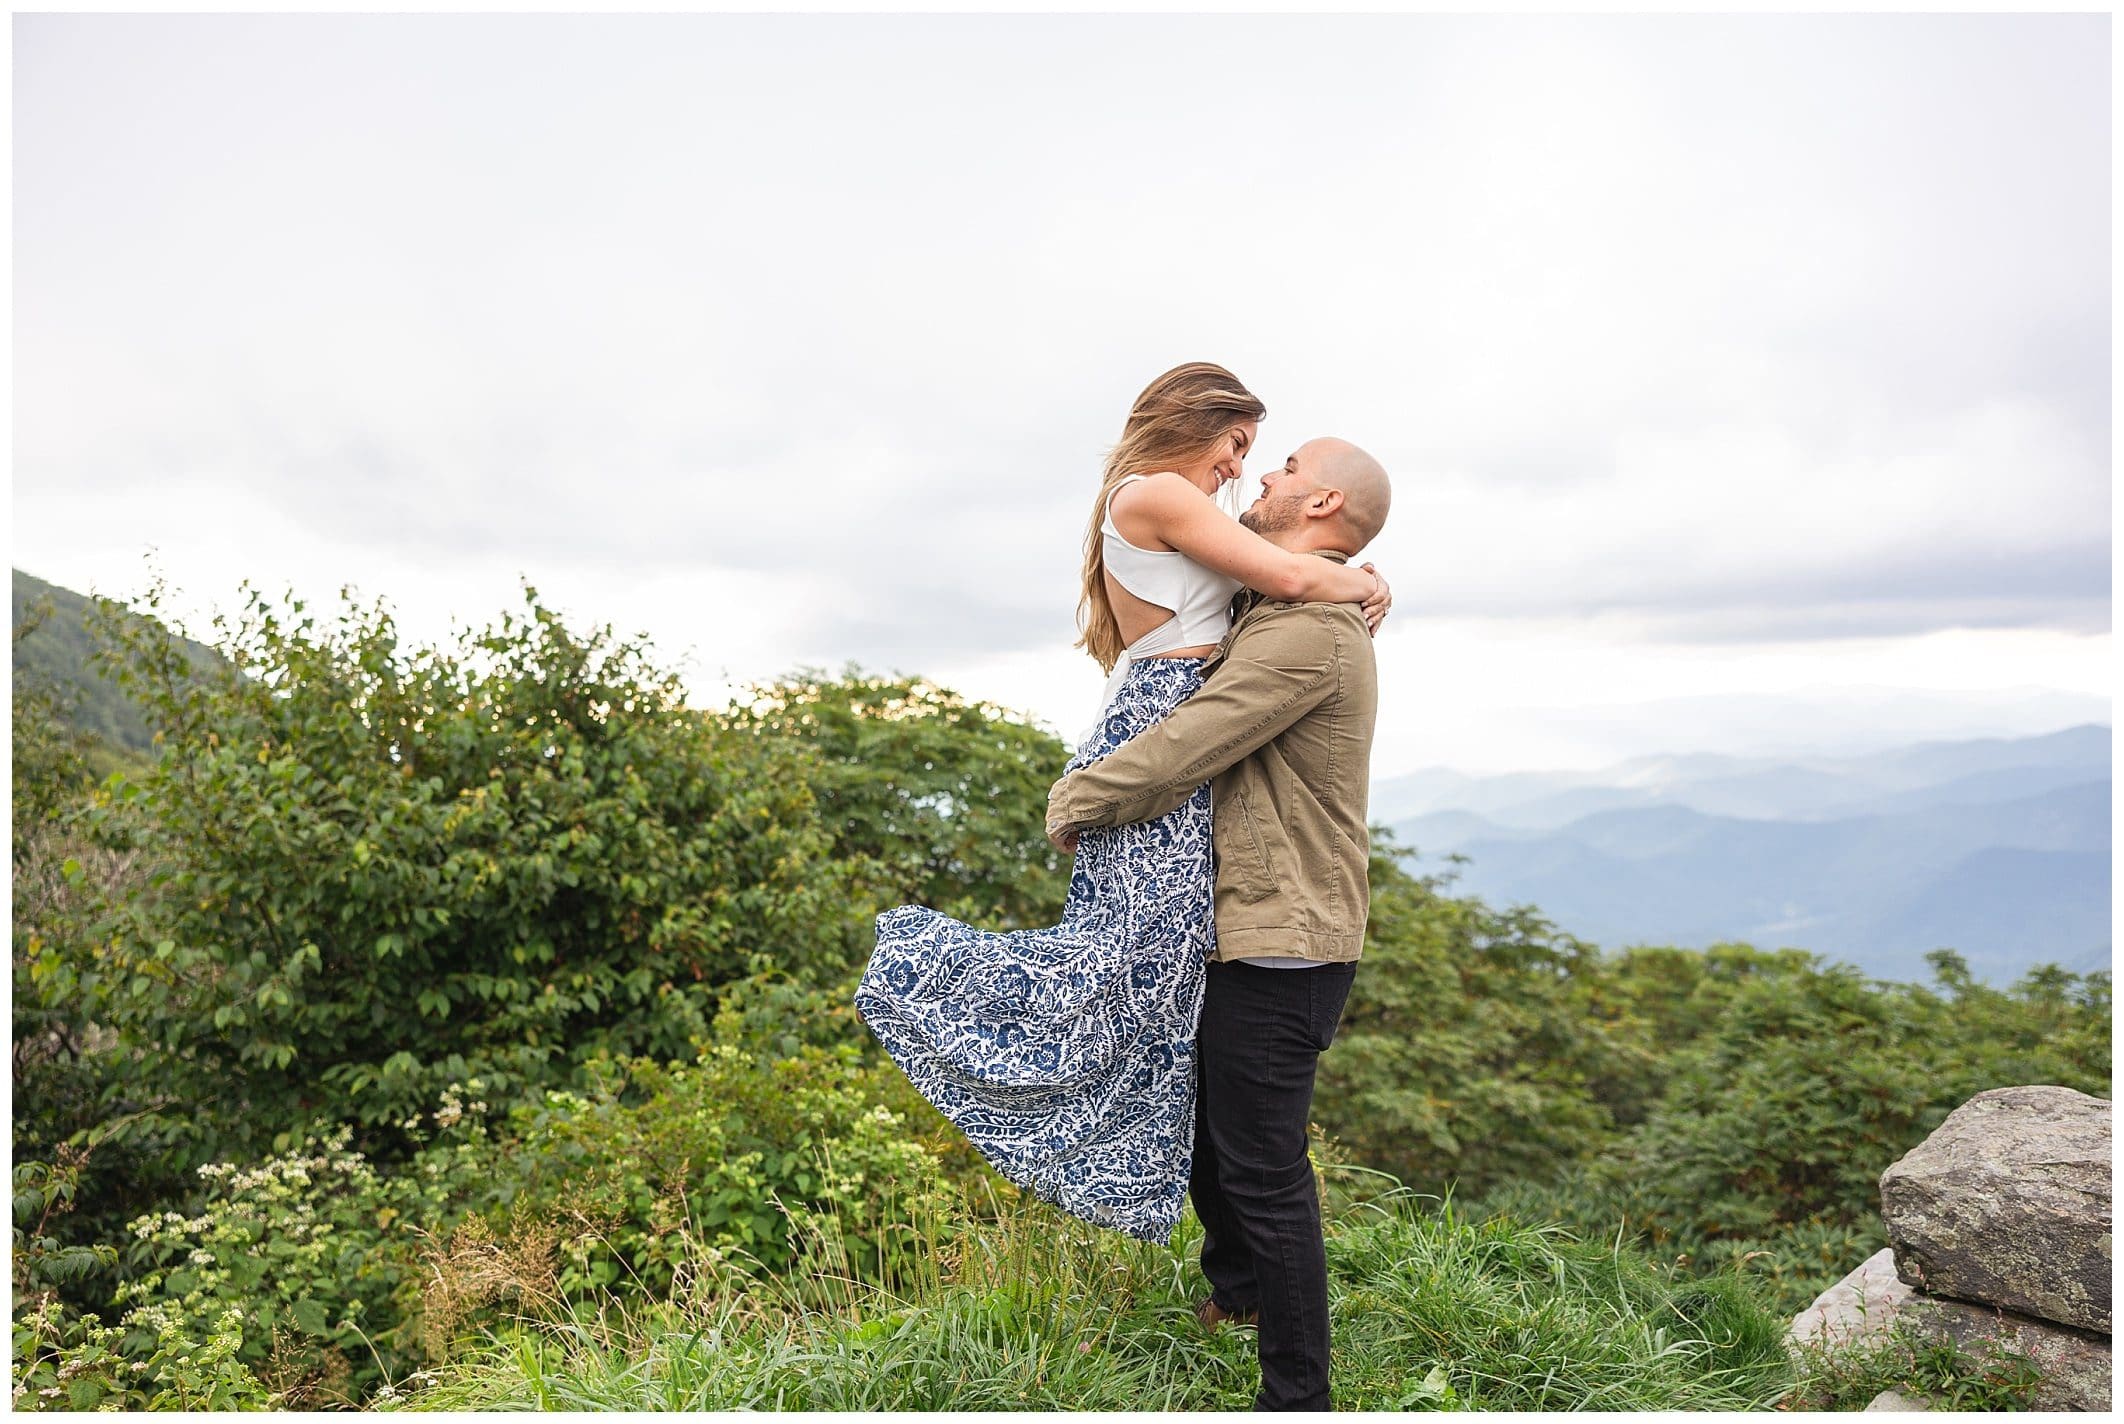 Couple embraces one another for their Blue Ridge Parkway engagement session